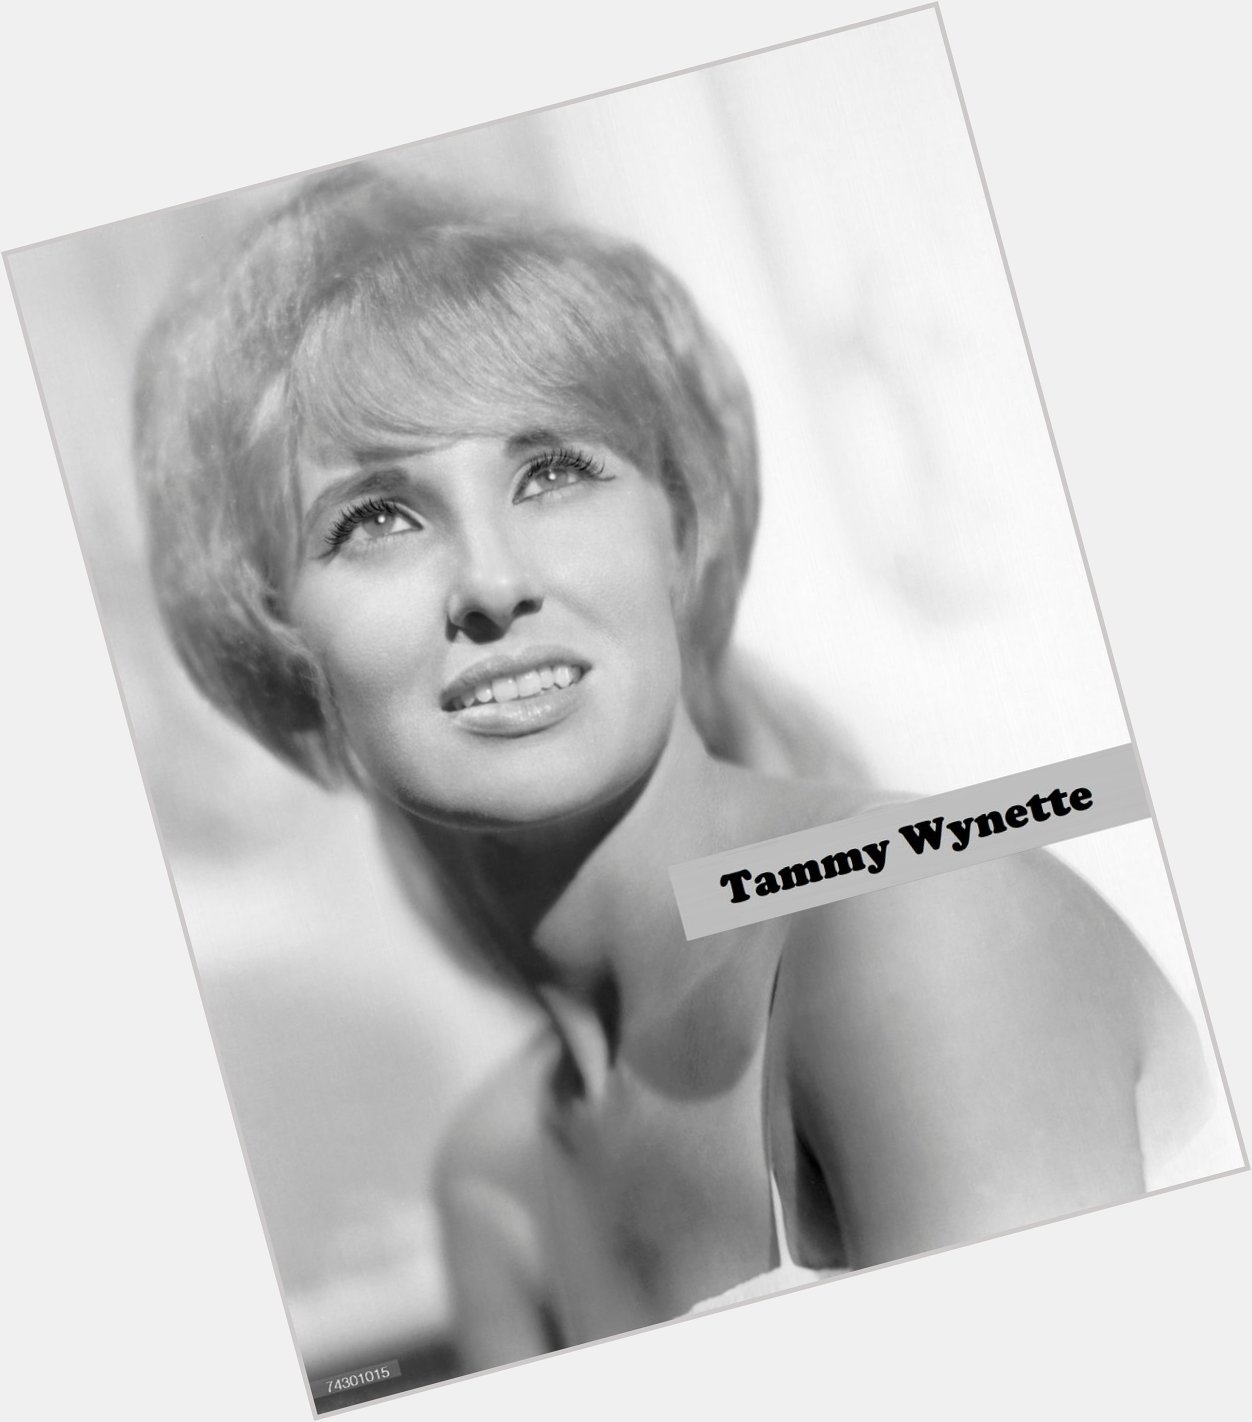 Happy Birthday Tammy Wynette!  She would have turned 80 today. 